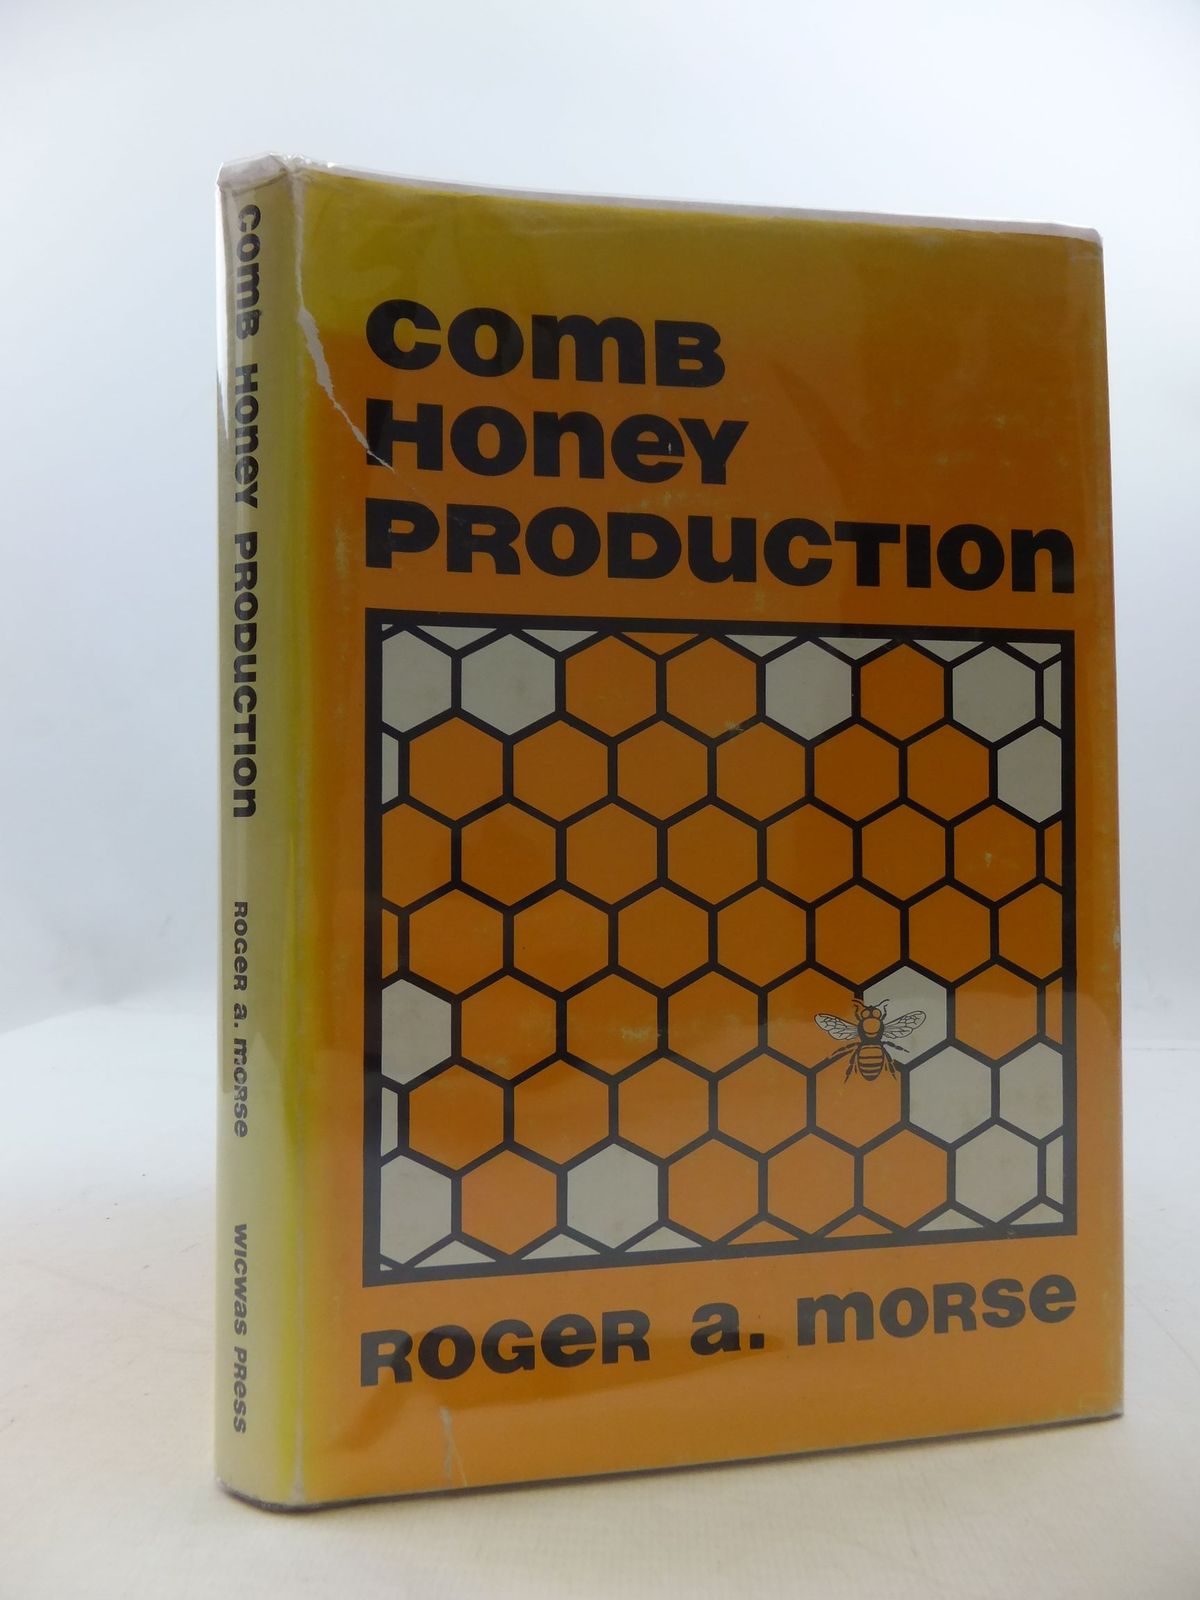 Photo of COMB HONEY PRODUCTION written by Morse, Roger A. published by Wicwas Press (STOCK CODE: 2111523)  for sale by Stella & Rose's Books